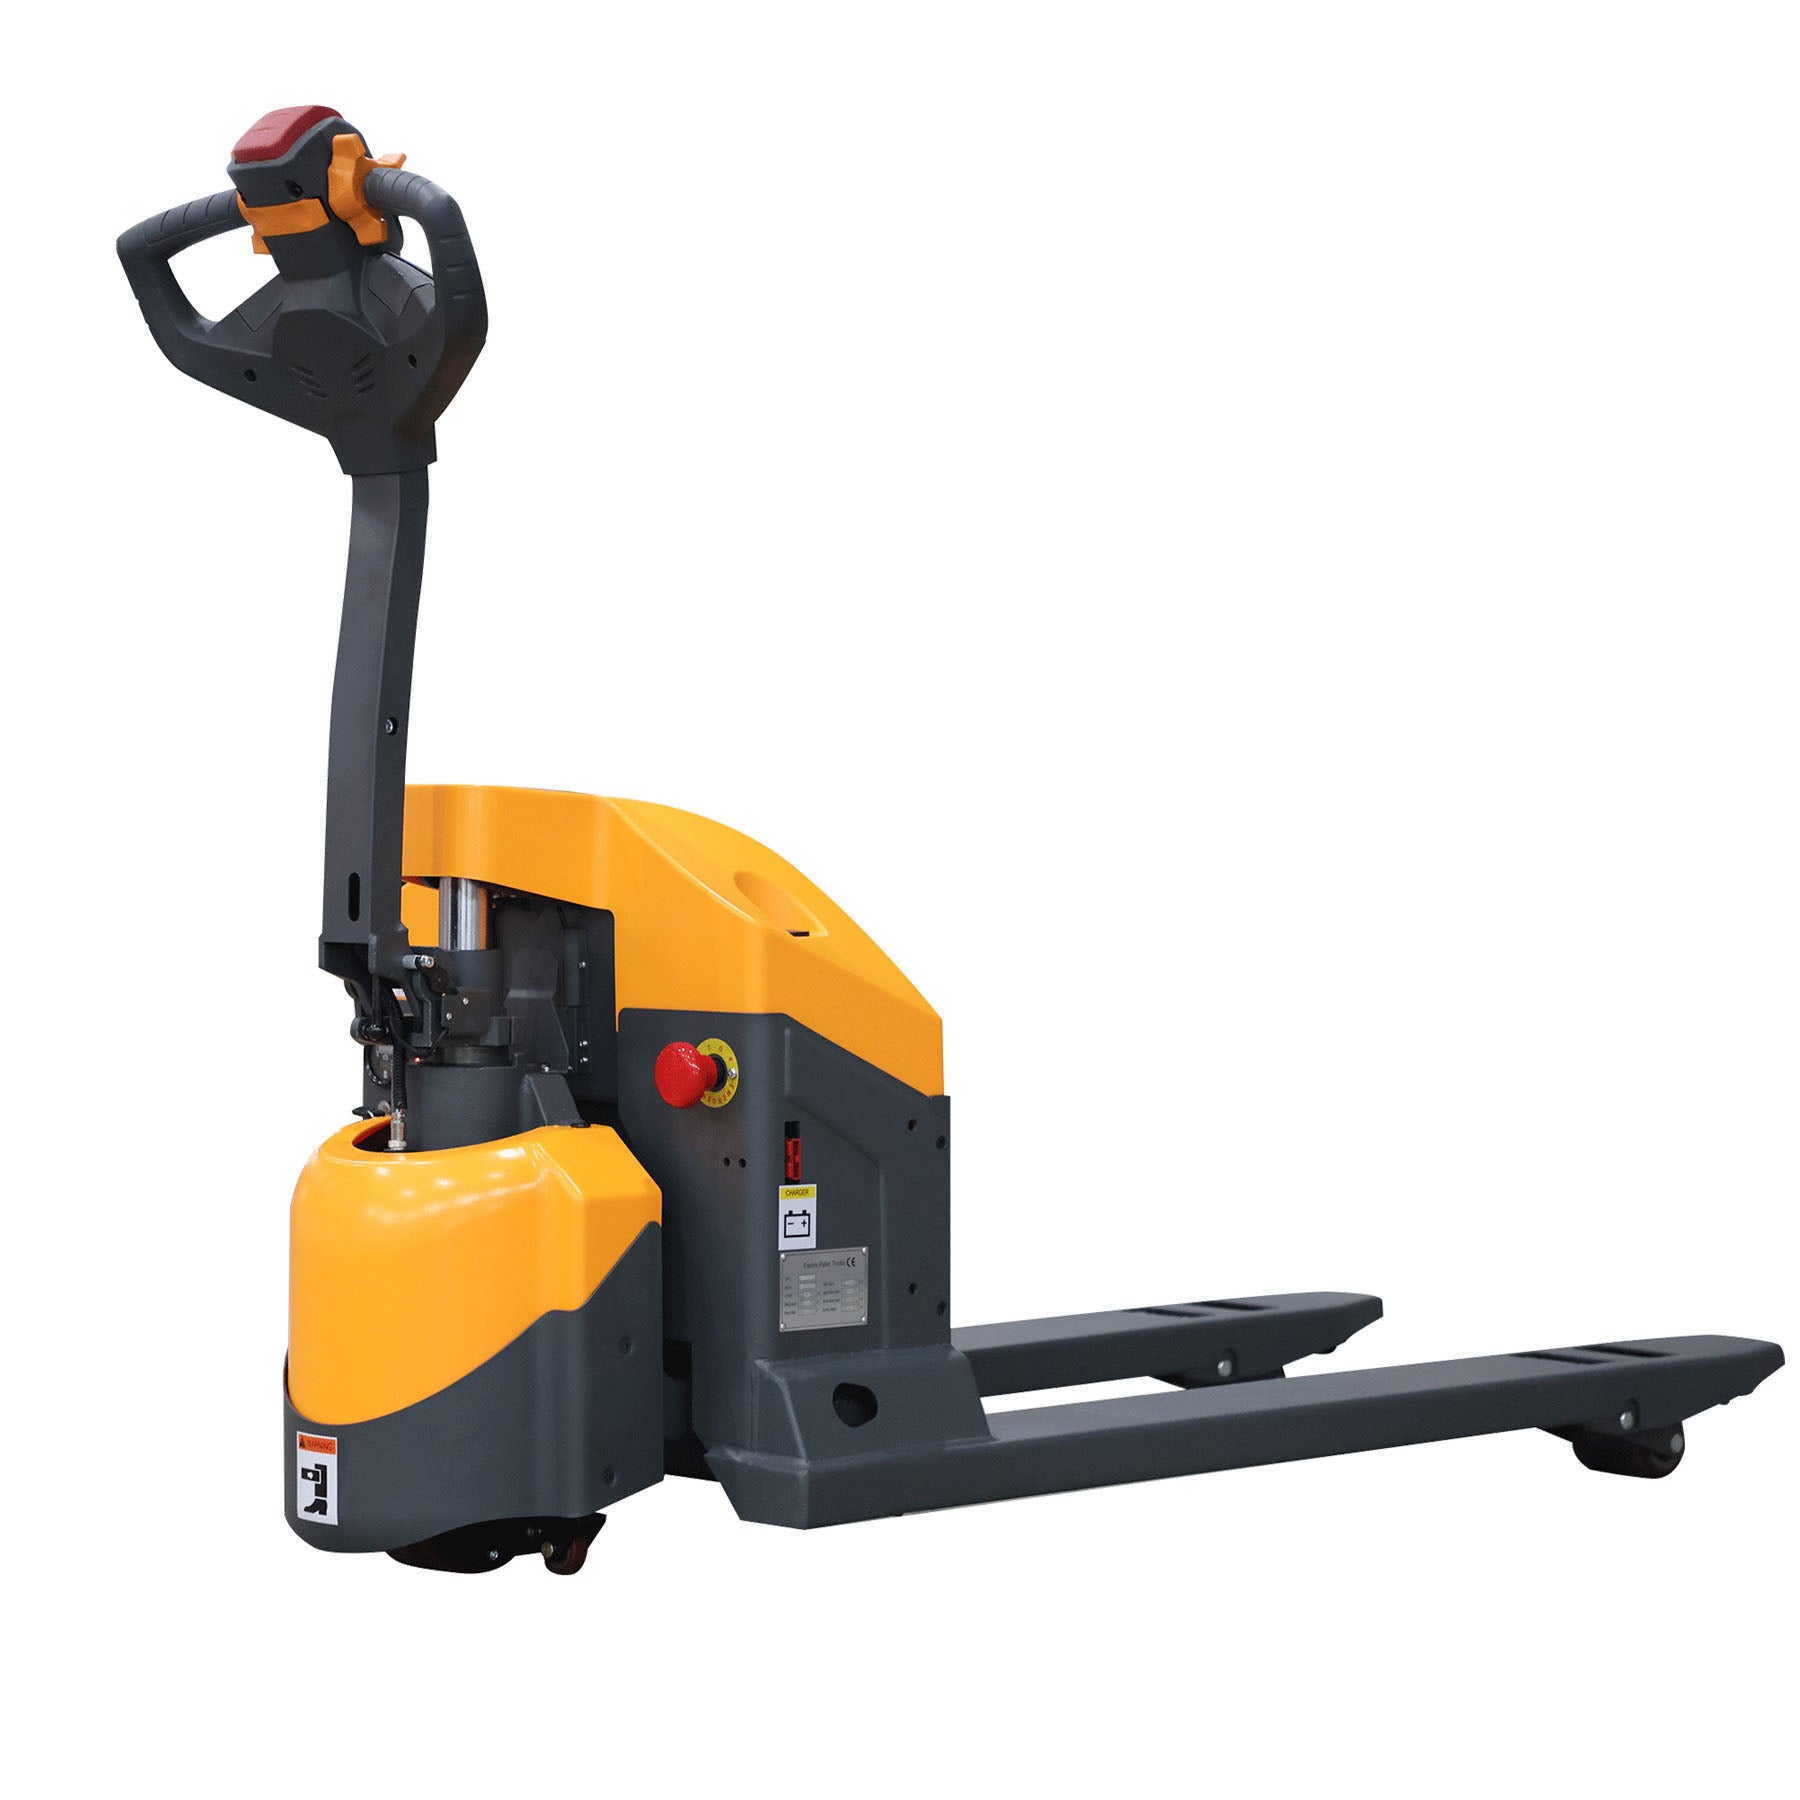 ApolloLift | Full Electric Pallet Jack With Emergency Key Switch 3300lbs Cap. 48" x27"